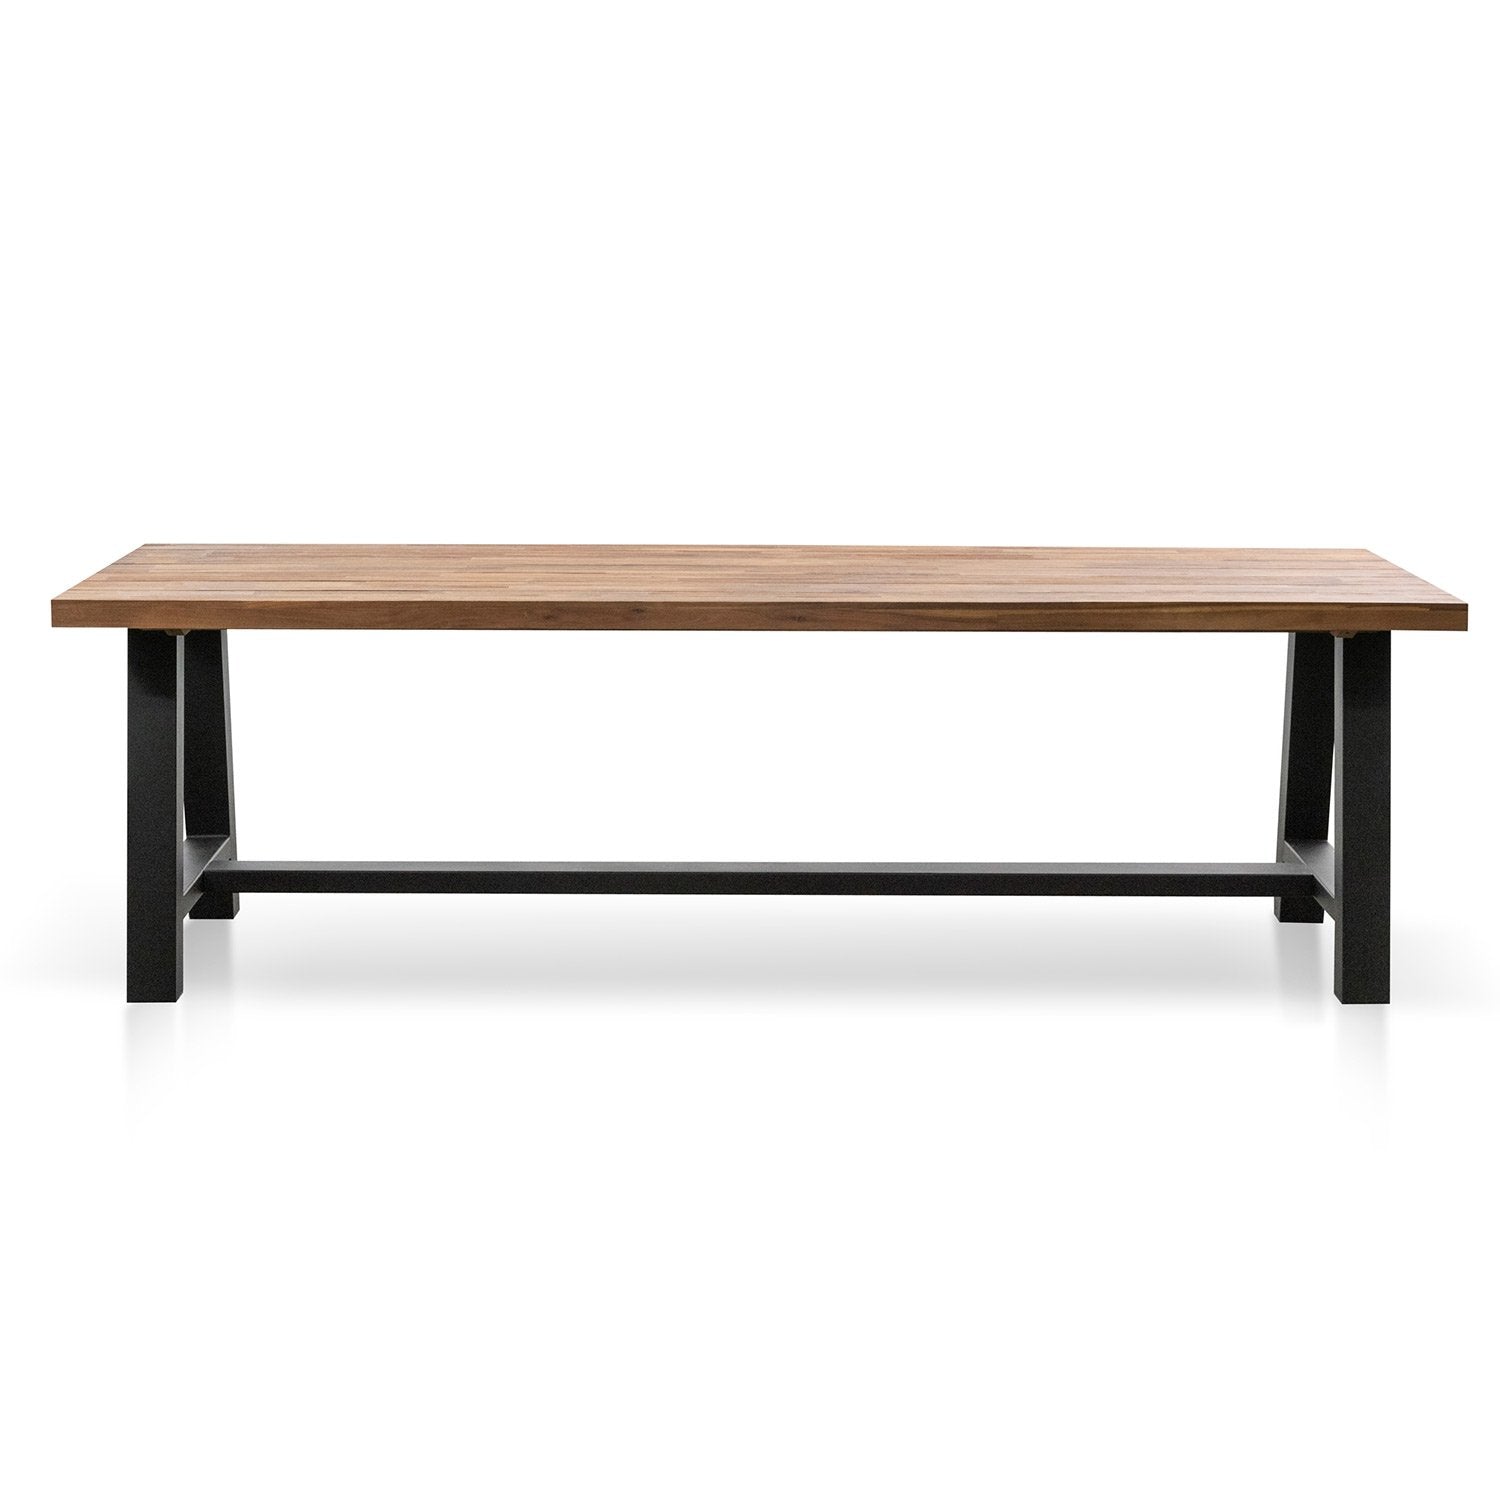 Nemo 2.5m Outdoor Dining Table - Natural Top and Black Base - Dining Tables